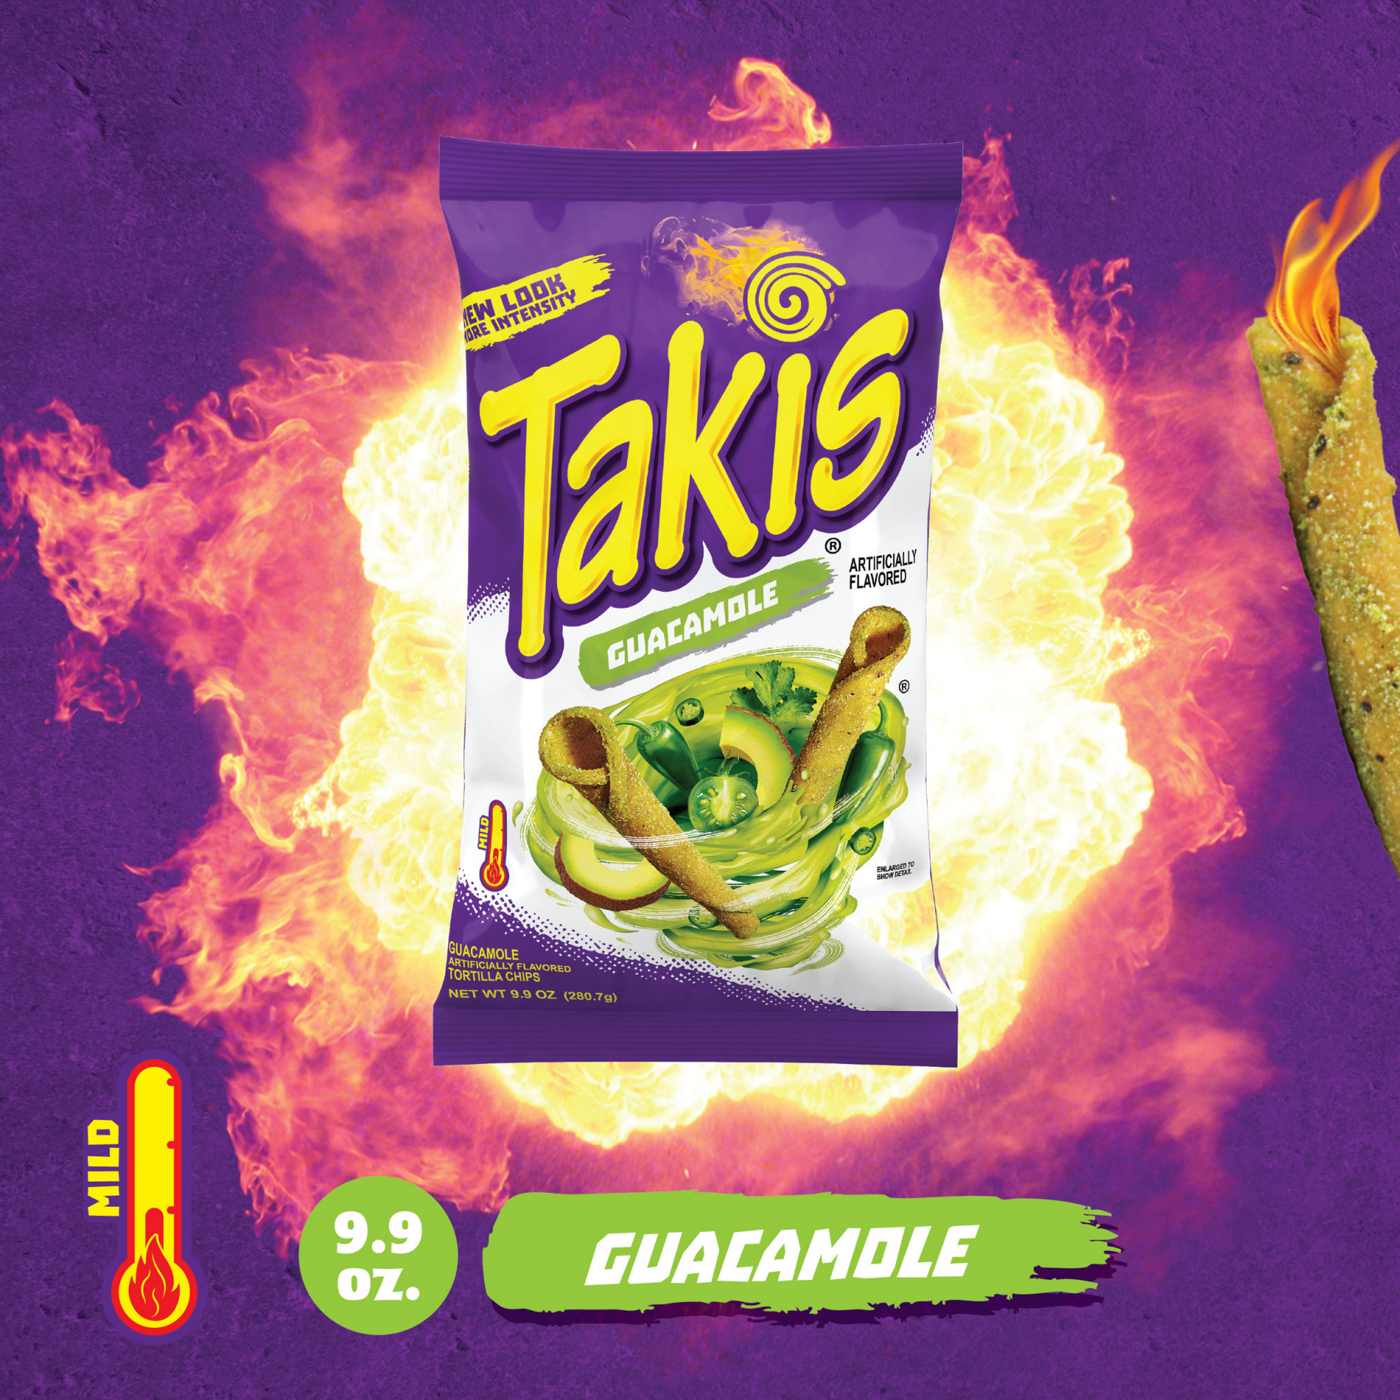 Takis Guacamole Rolled Tortilla Chips; image 6 of 7